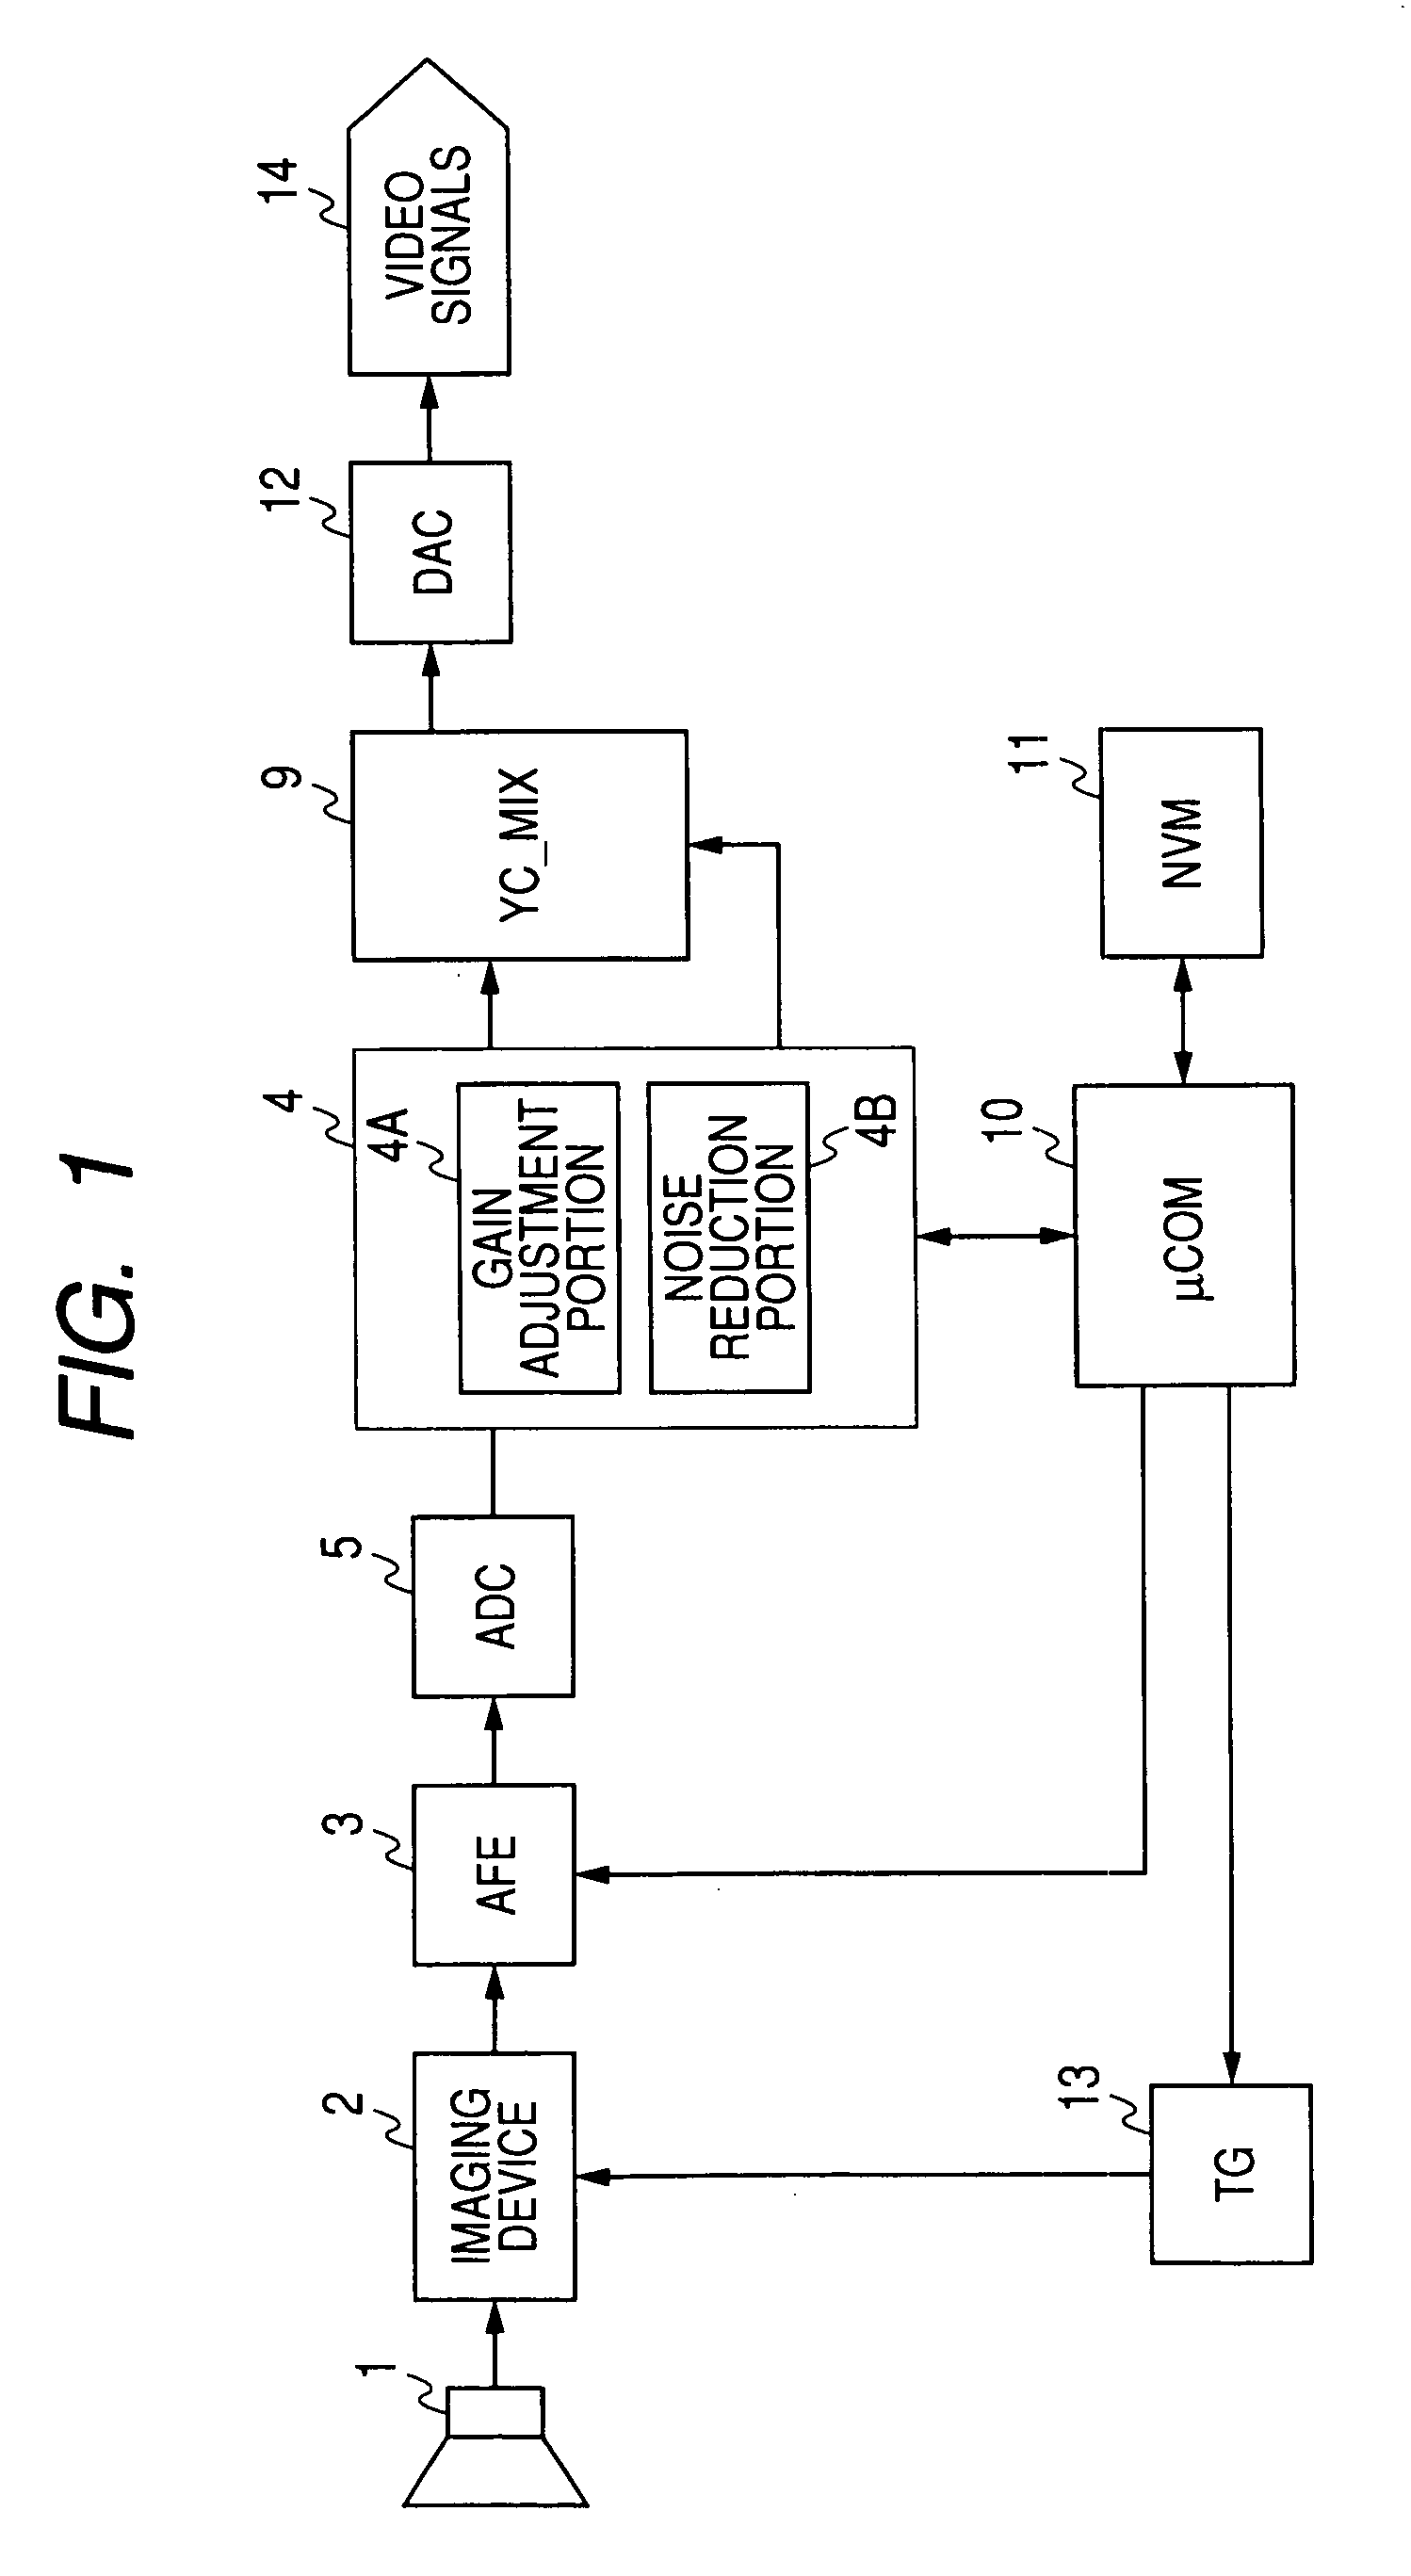 Video input processor, imaging signal-processing circuit, and method of reducing noises in imaging signals